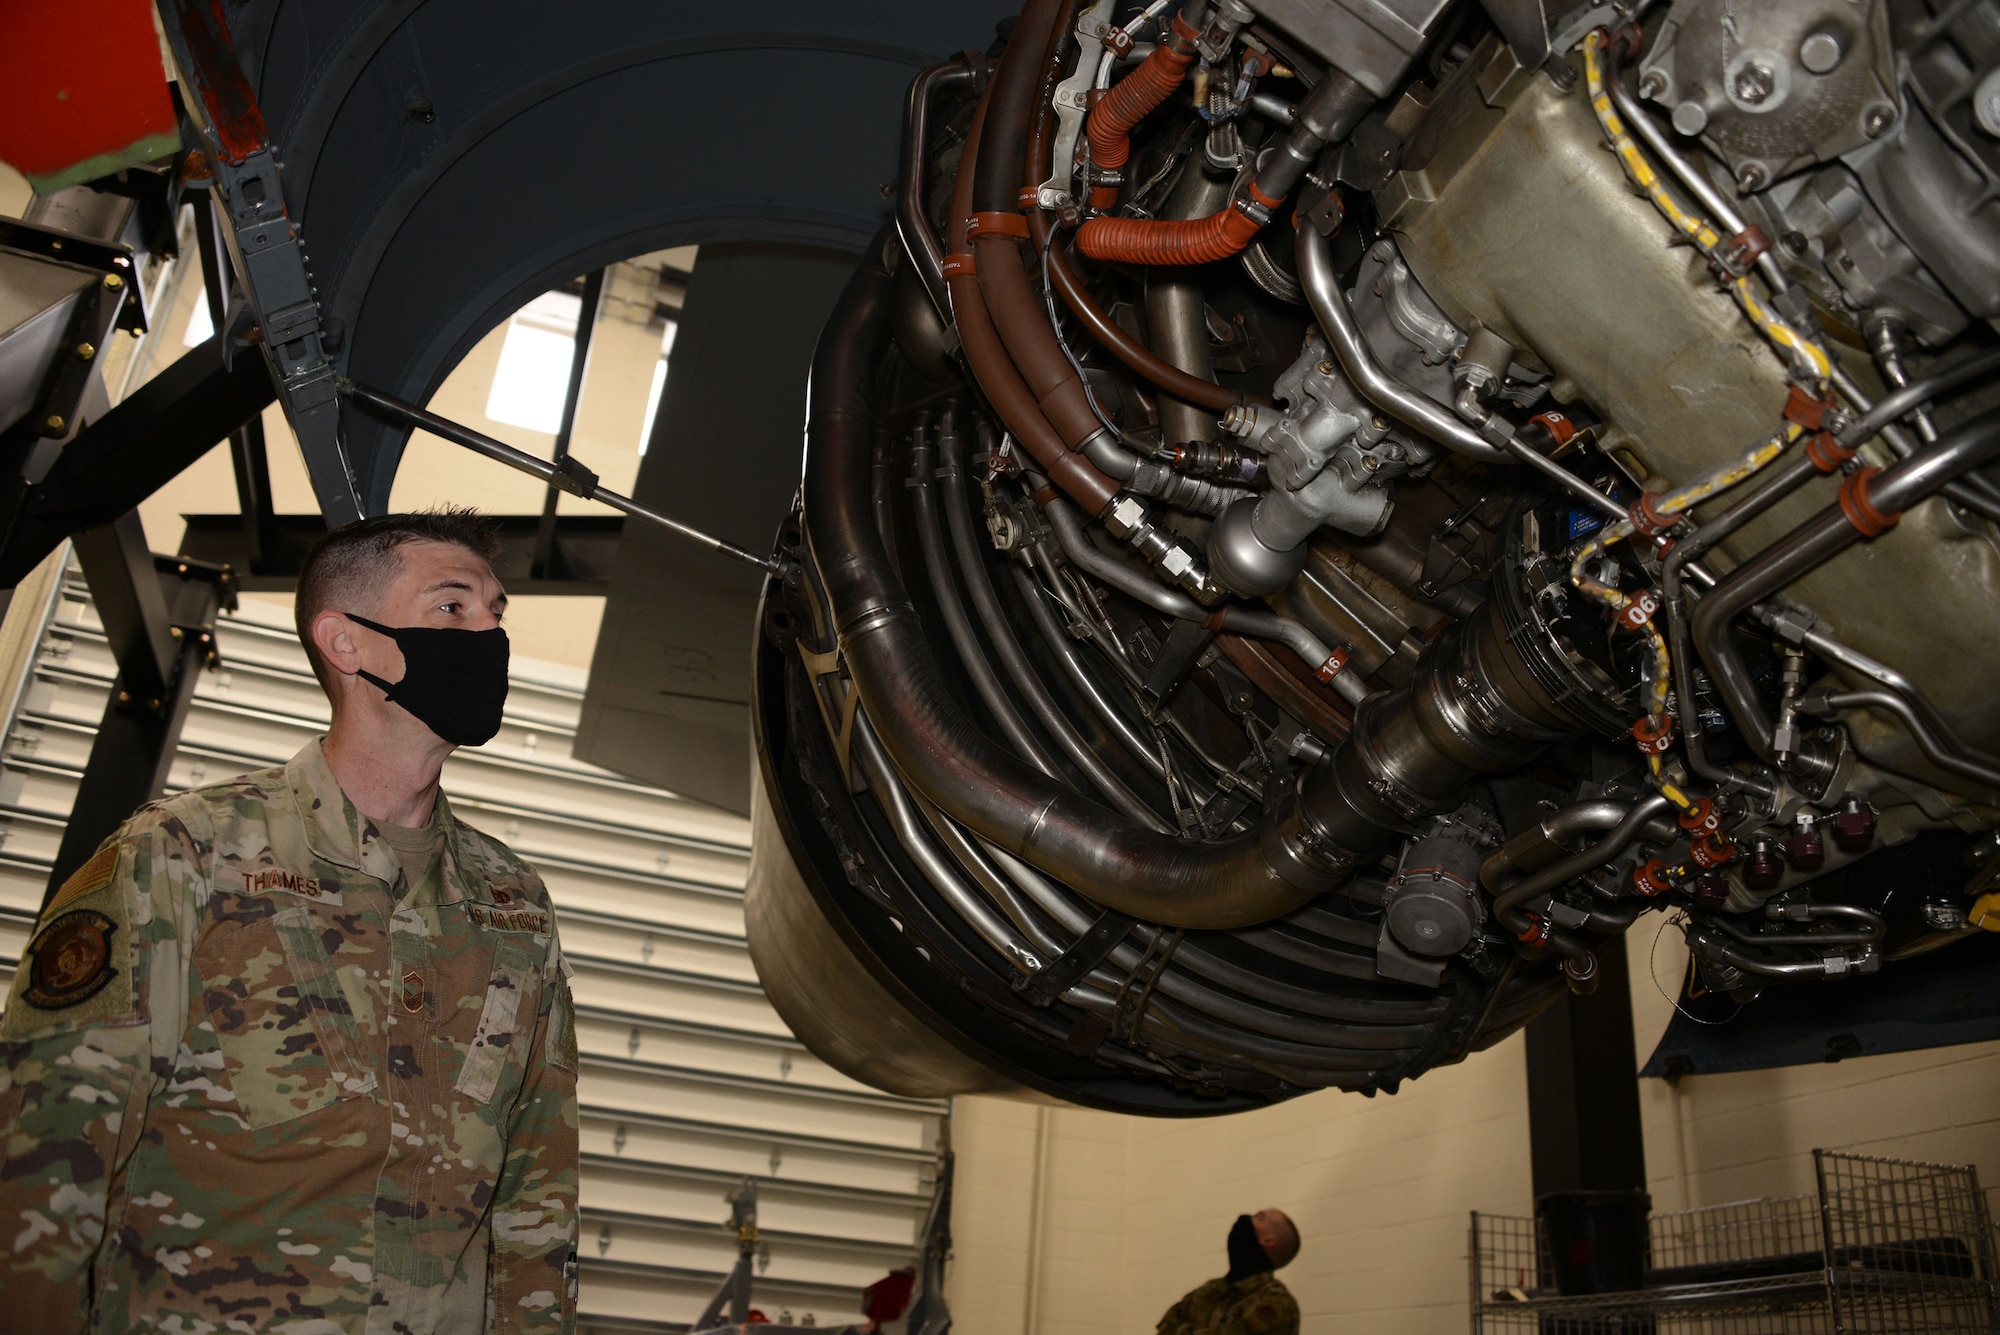 Senior Master Sgt. Robert Thames, the recruiting flight chief at Whiteman Air Force Base, Missouri, checks out the engine of a KC-46 Pegasus at the school house located at McConnell Air Force Base, Kansas, Apr. 9, 2021